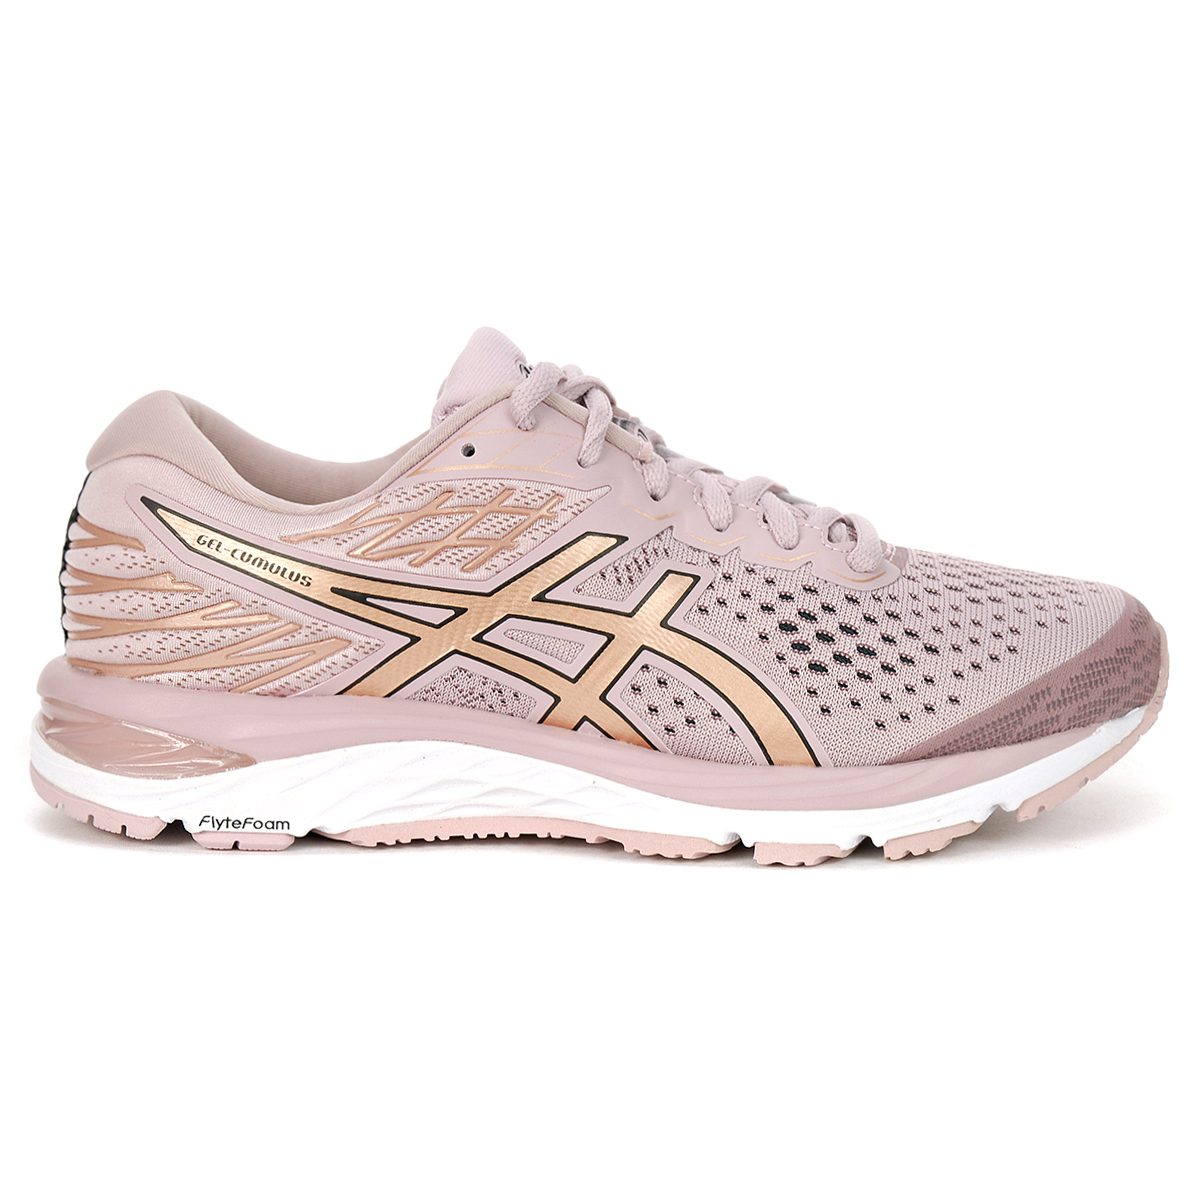 ASICS Women's Gel-Cumulus 21 Watershed Rose/Gold Running Shoes 1012A468.700  NEW | eBay